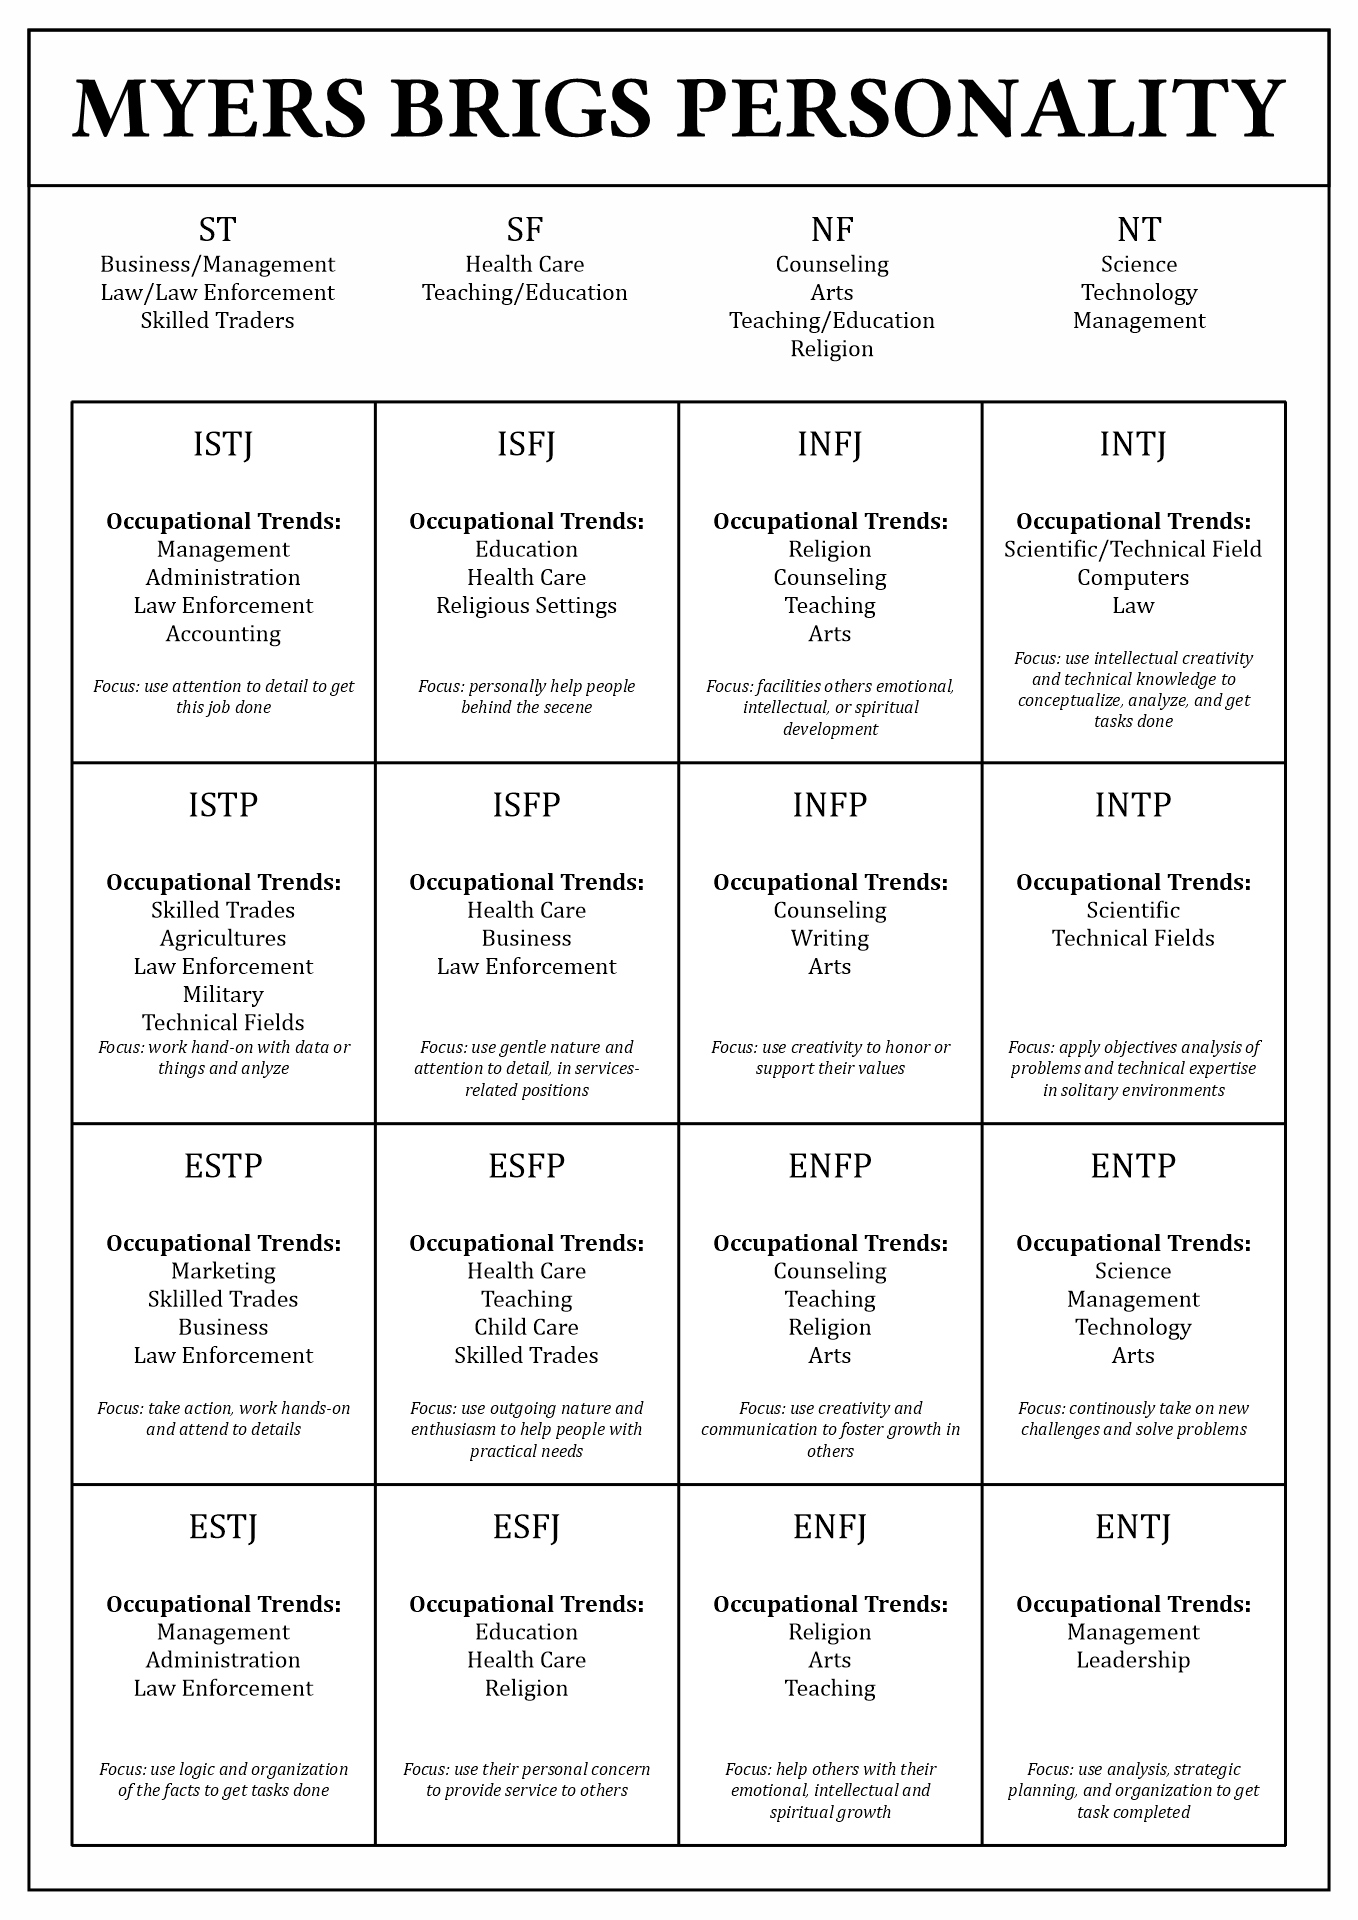 Myers-Briggs Personality Assessment